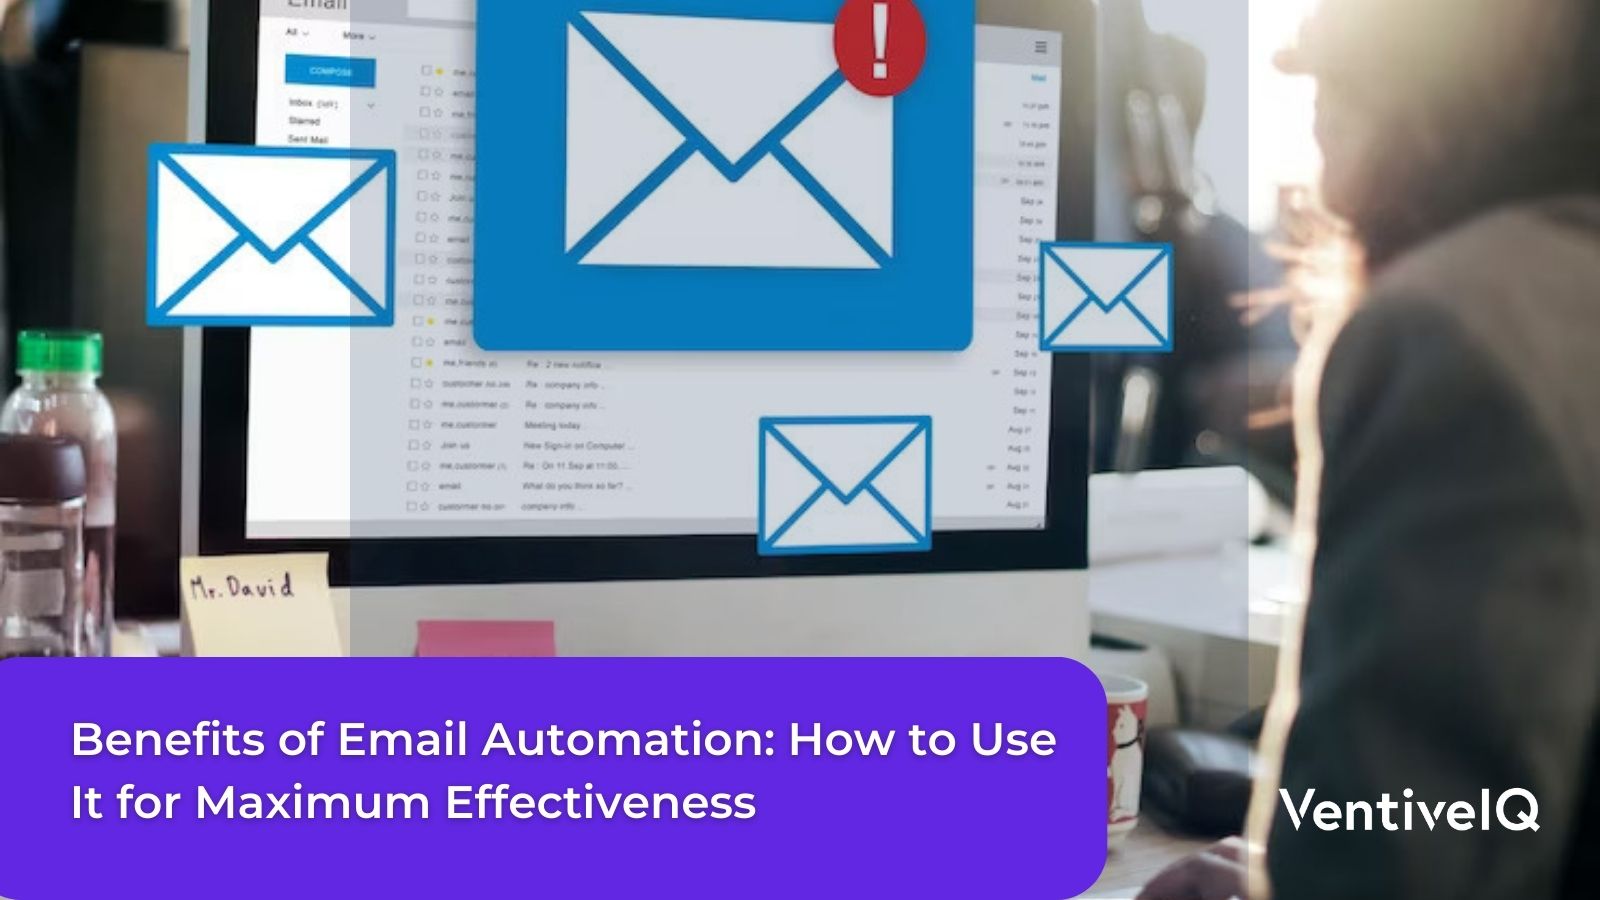 The Benefits of Email Automation: How to Use It for Maximum Effectiveness